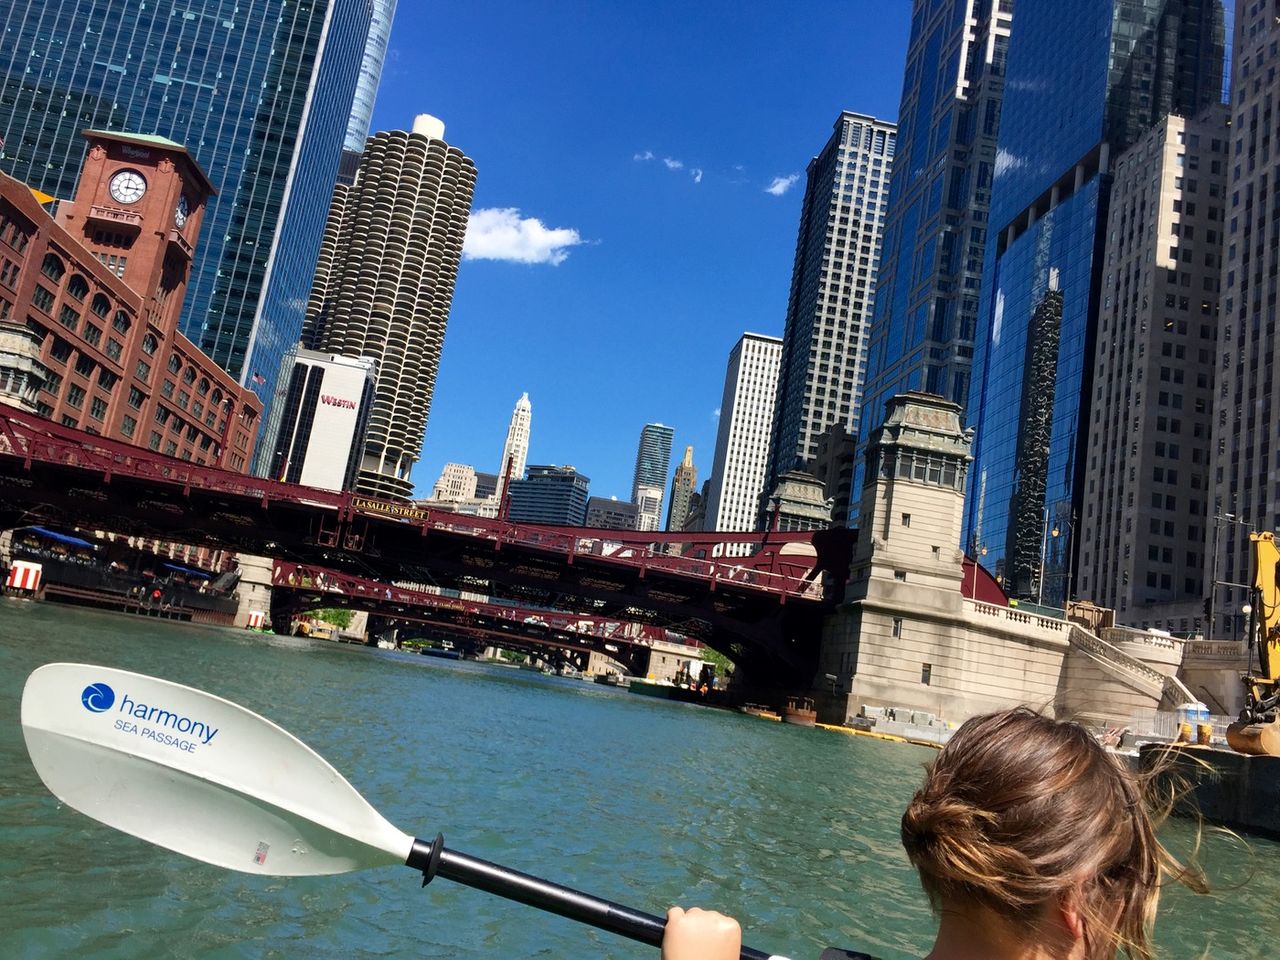 Woman paddline kayak in the Chicago river as they pass Marina Towers.